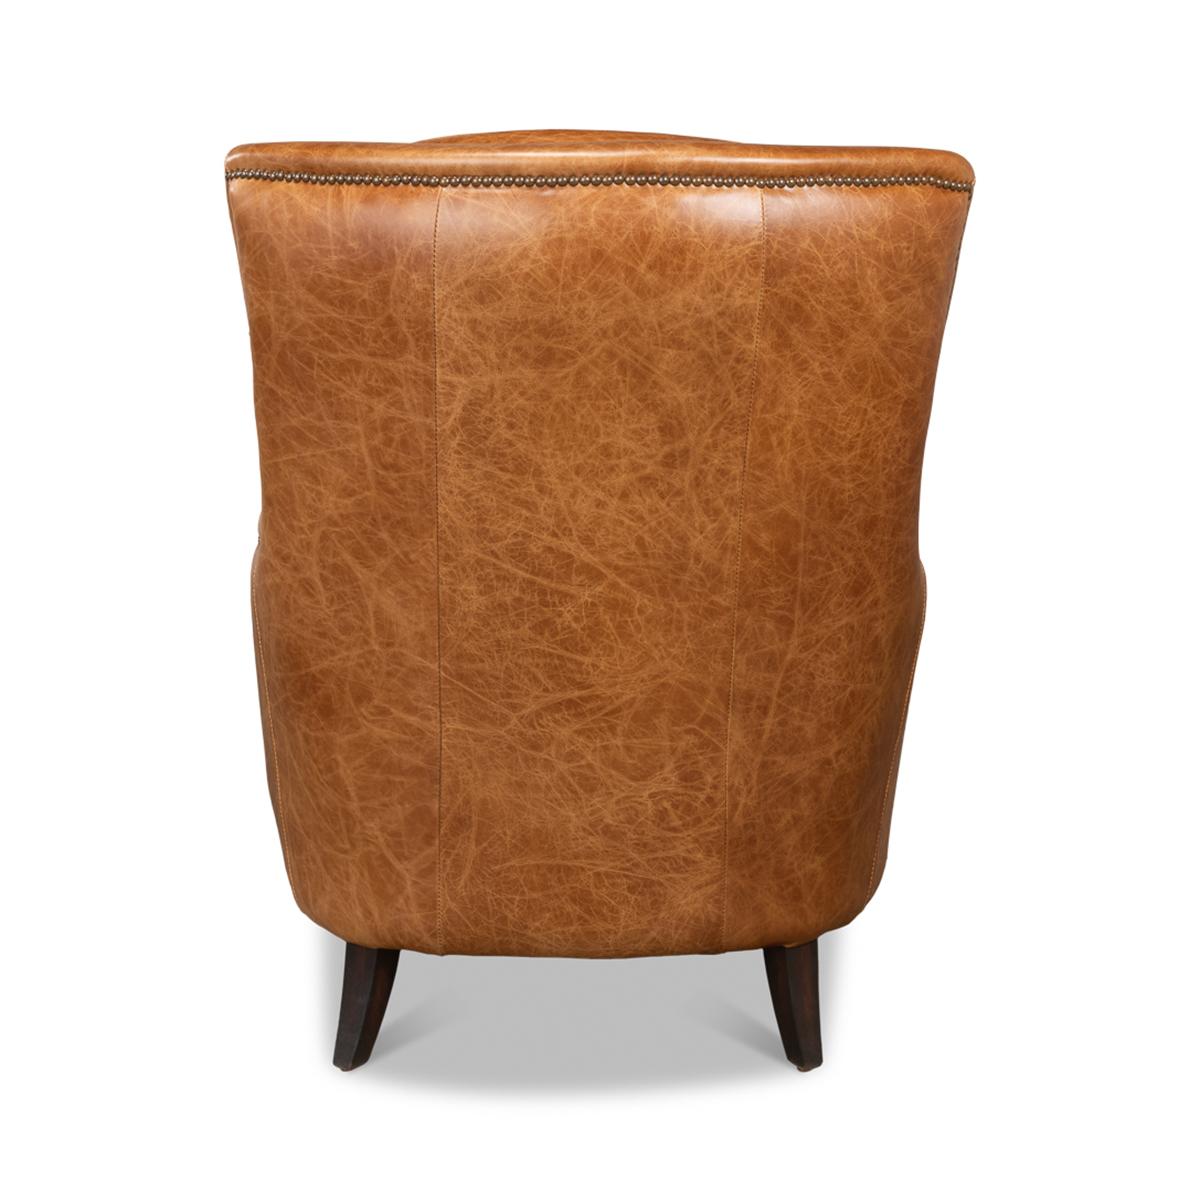 leather brown armchair